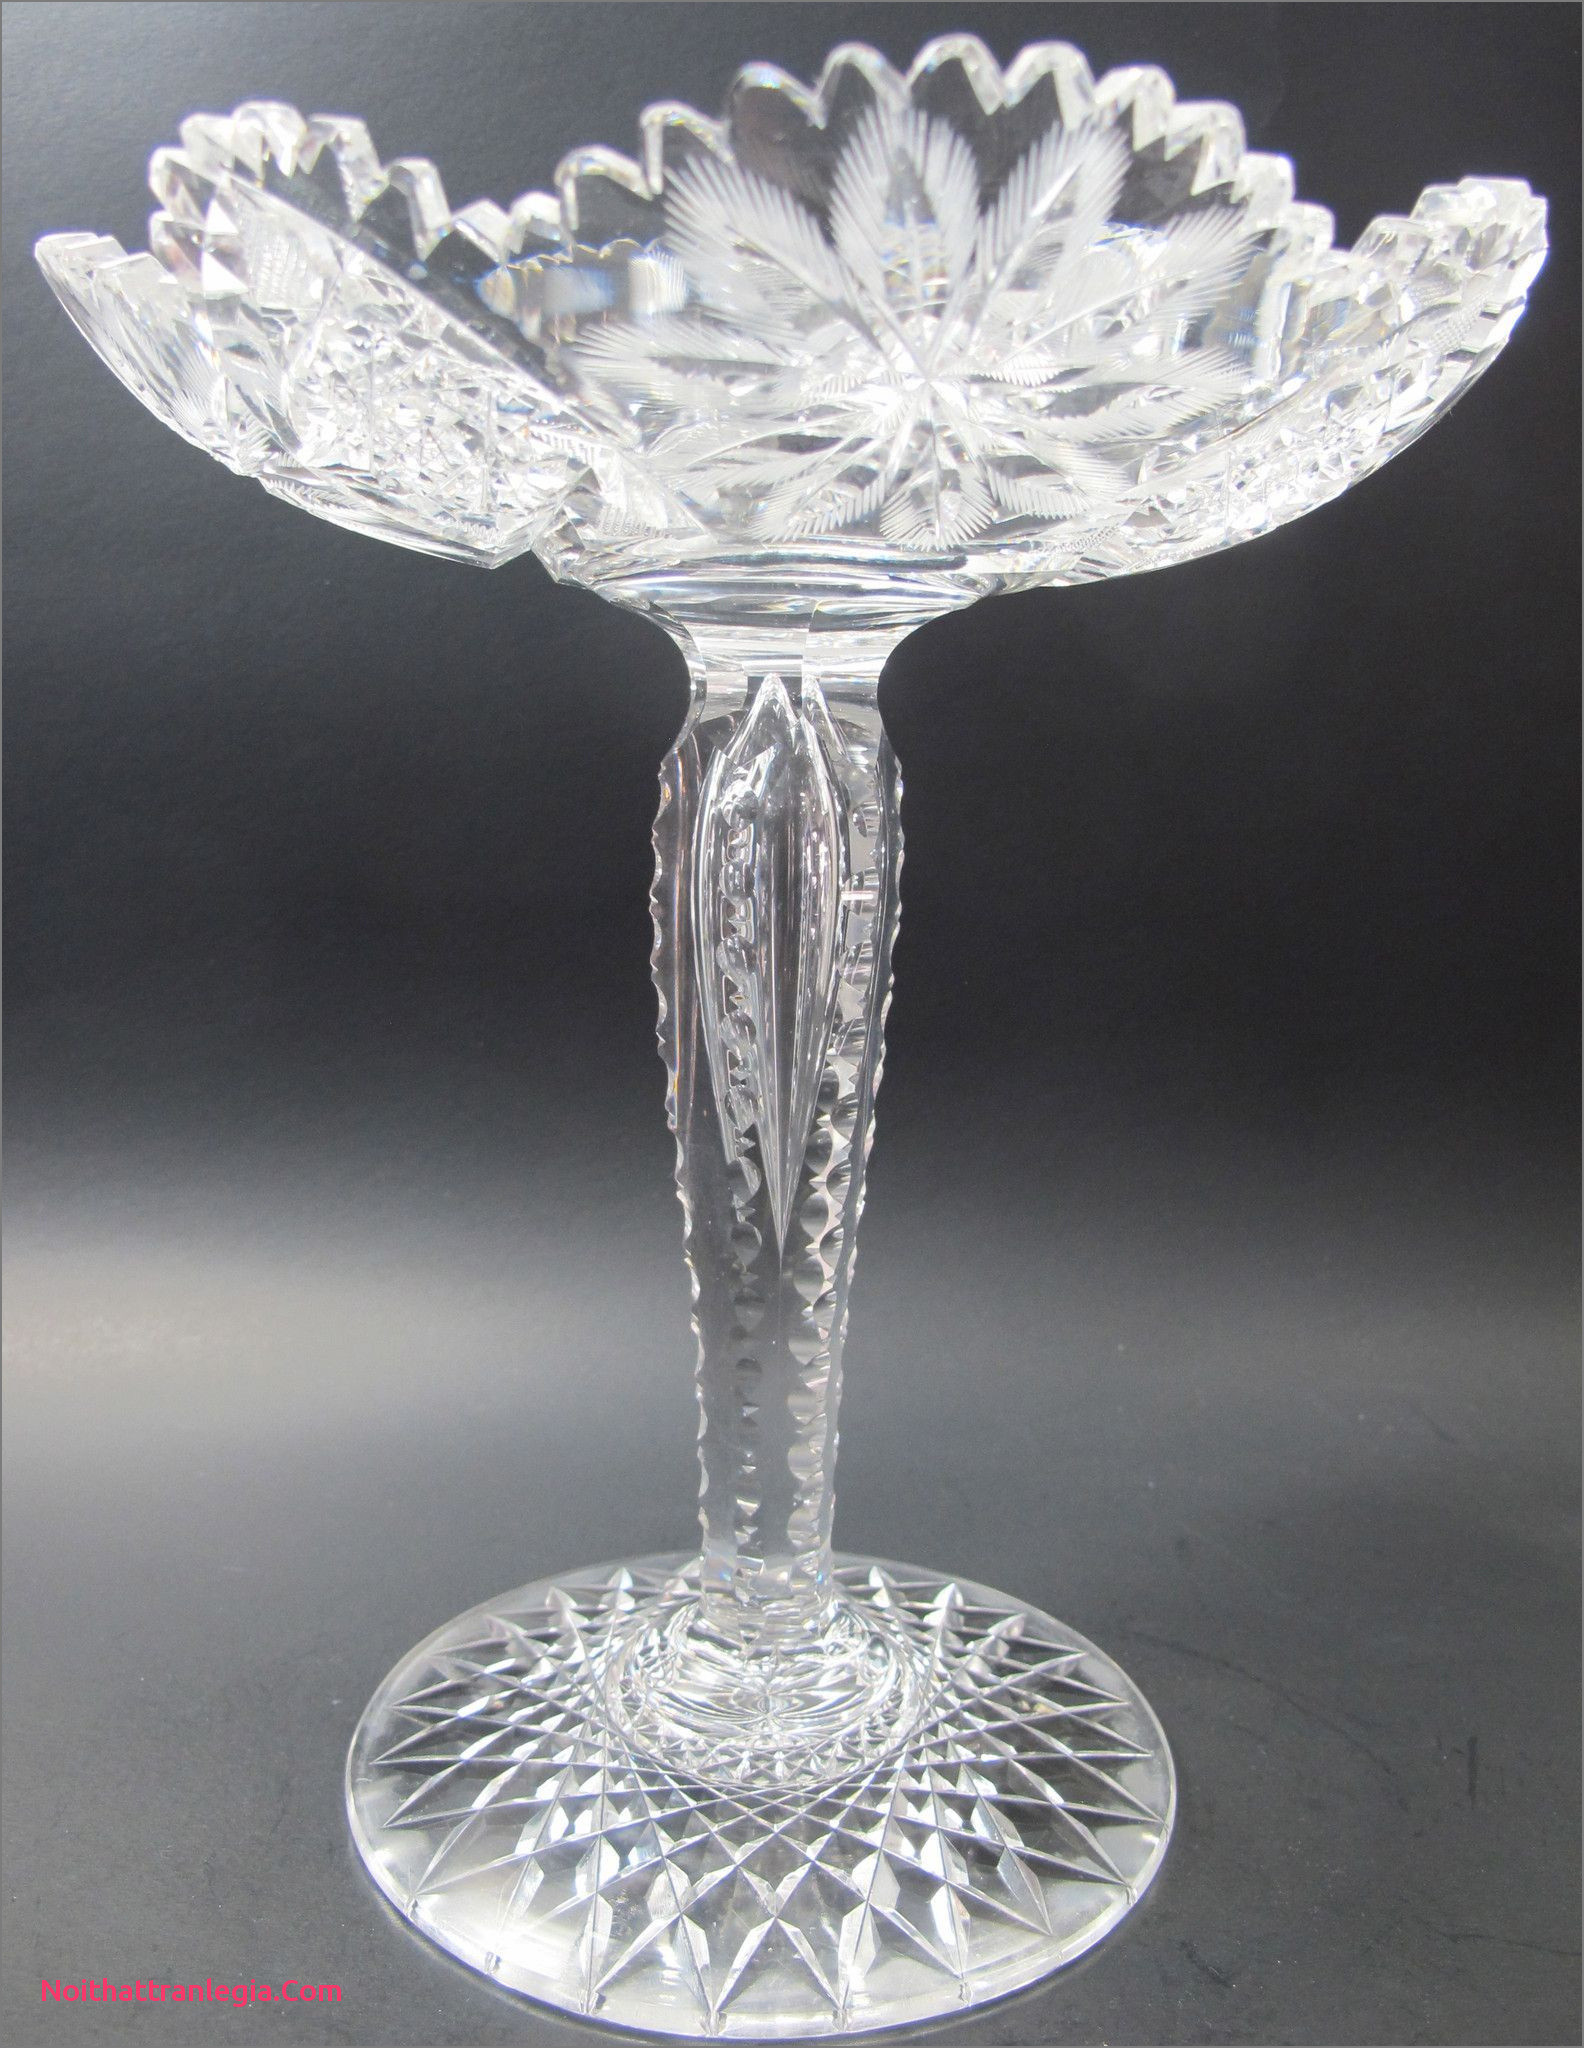 26 Recommended Mercury Glass Pedestal Vase 2024 free download mercury glass pedestal vase of 20 cut glass antique vase noithattranlegia vases design in fering this abp antique cut glass pote from the american brilliant period 1886 1916 9 5